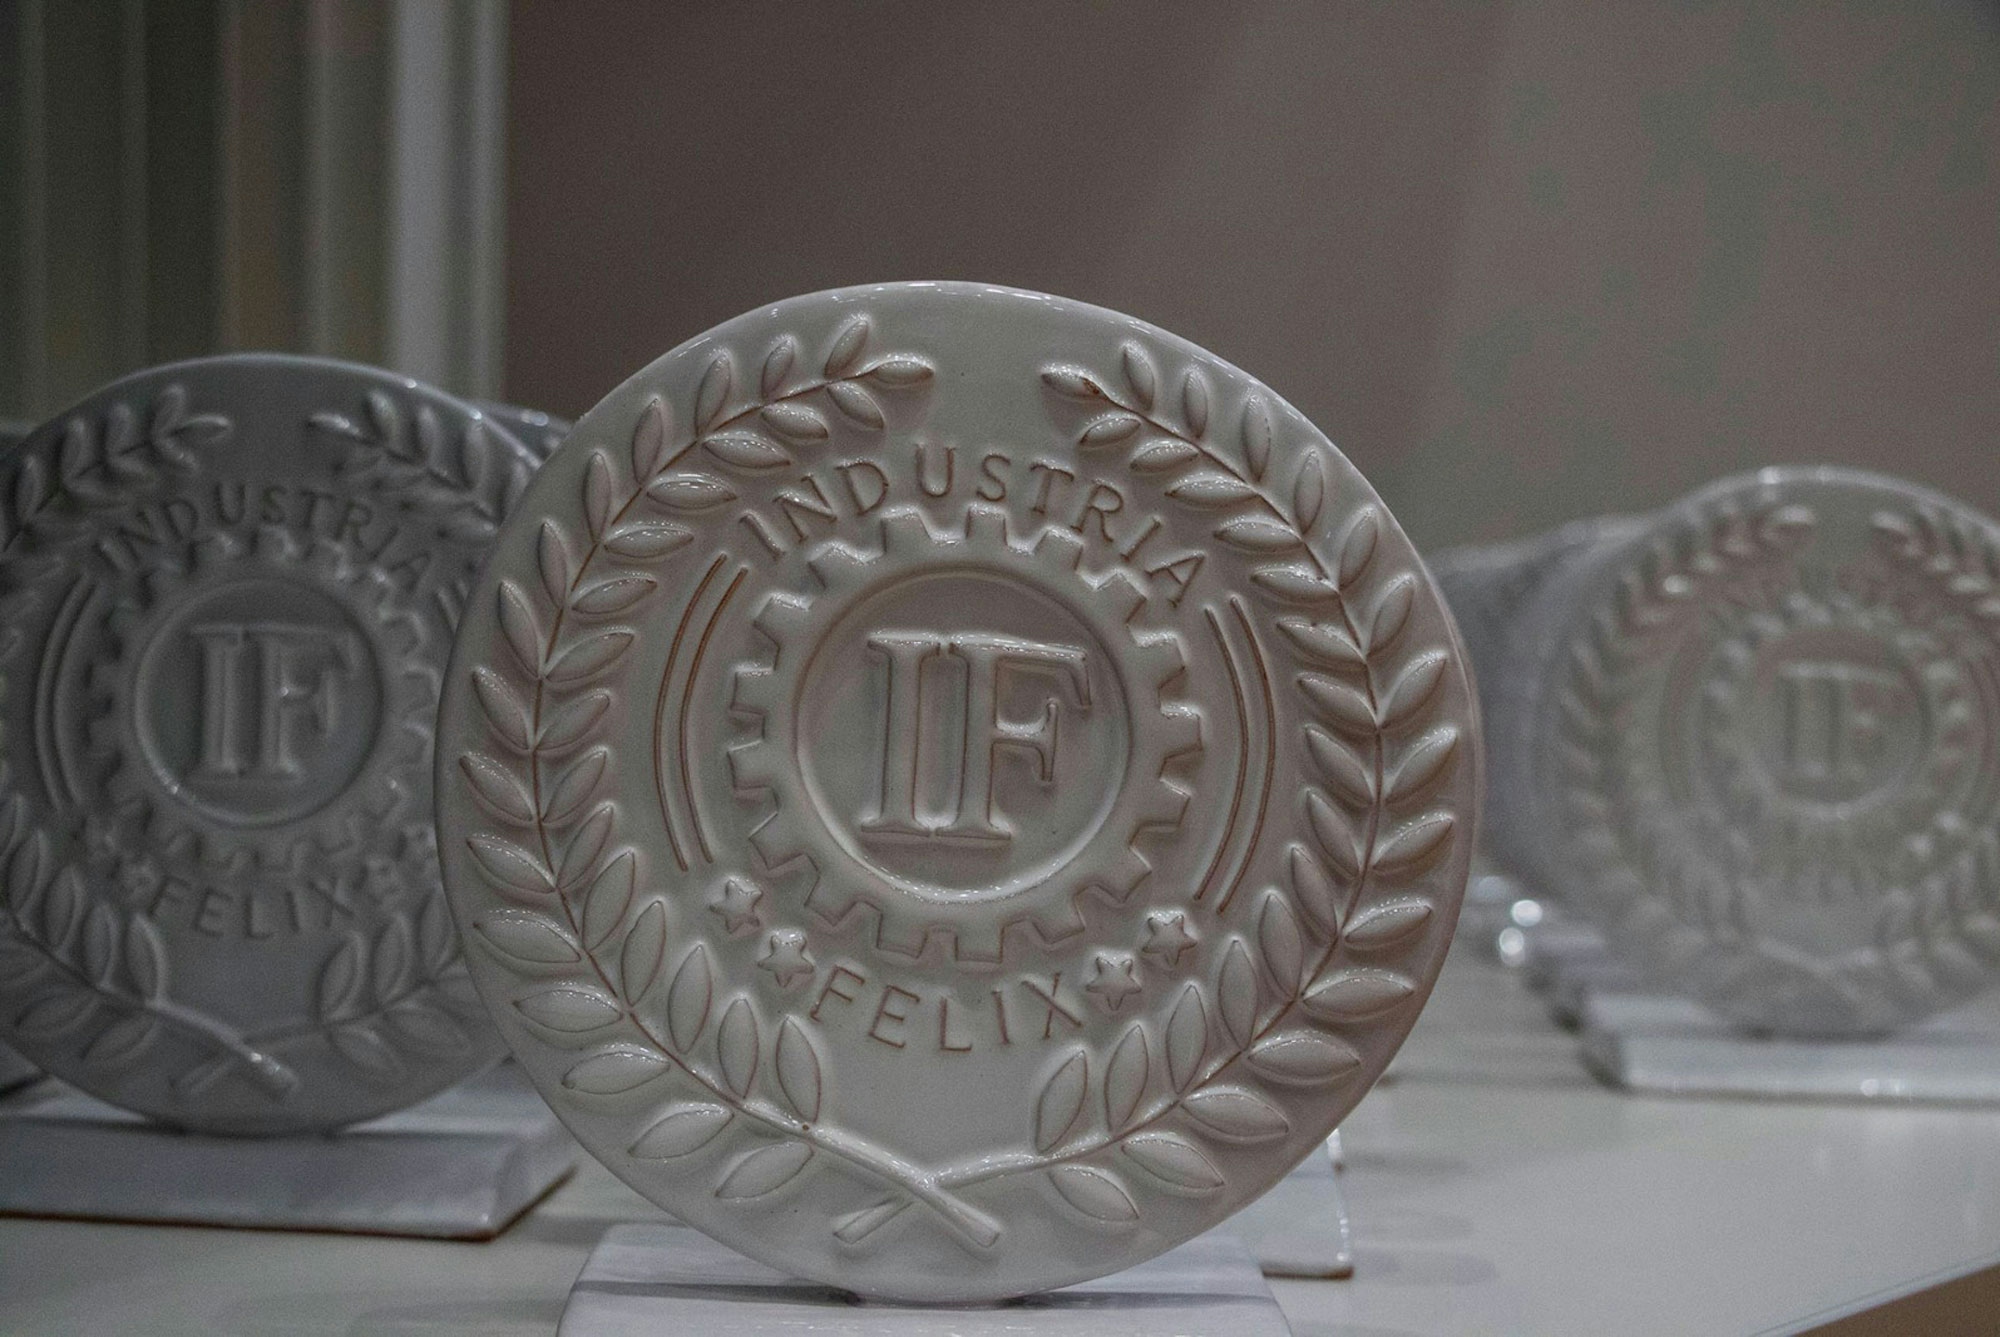 Catellani &#038; Smith receives an accolade at the Industria Felix Awards at the LUISS University in Rome